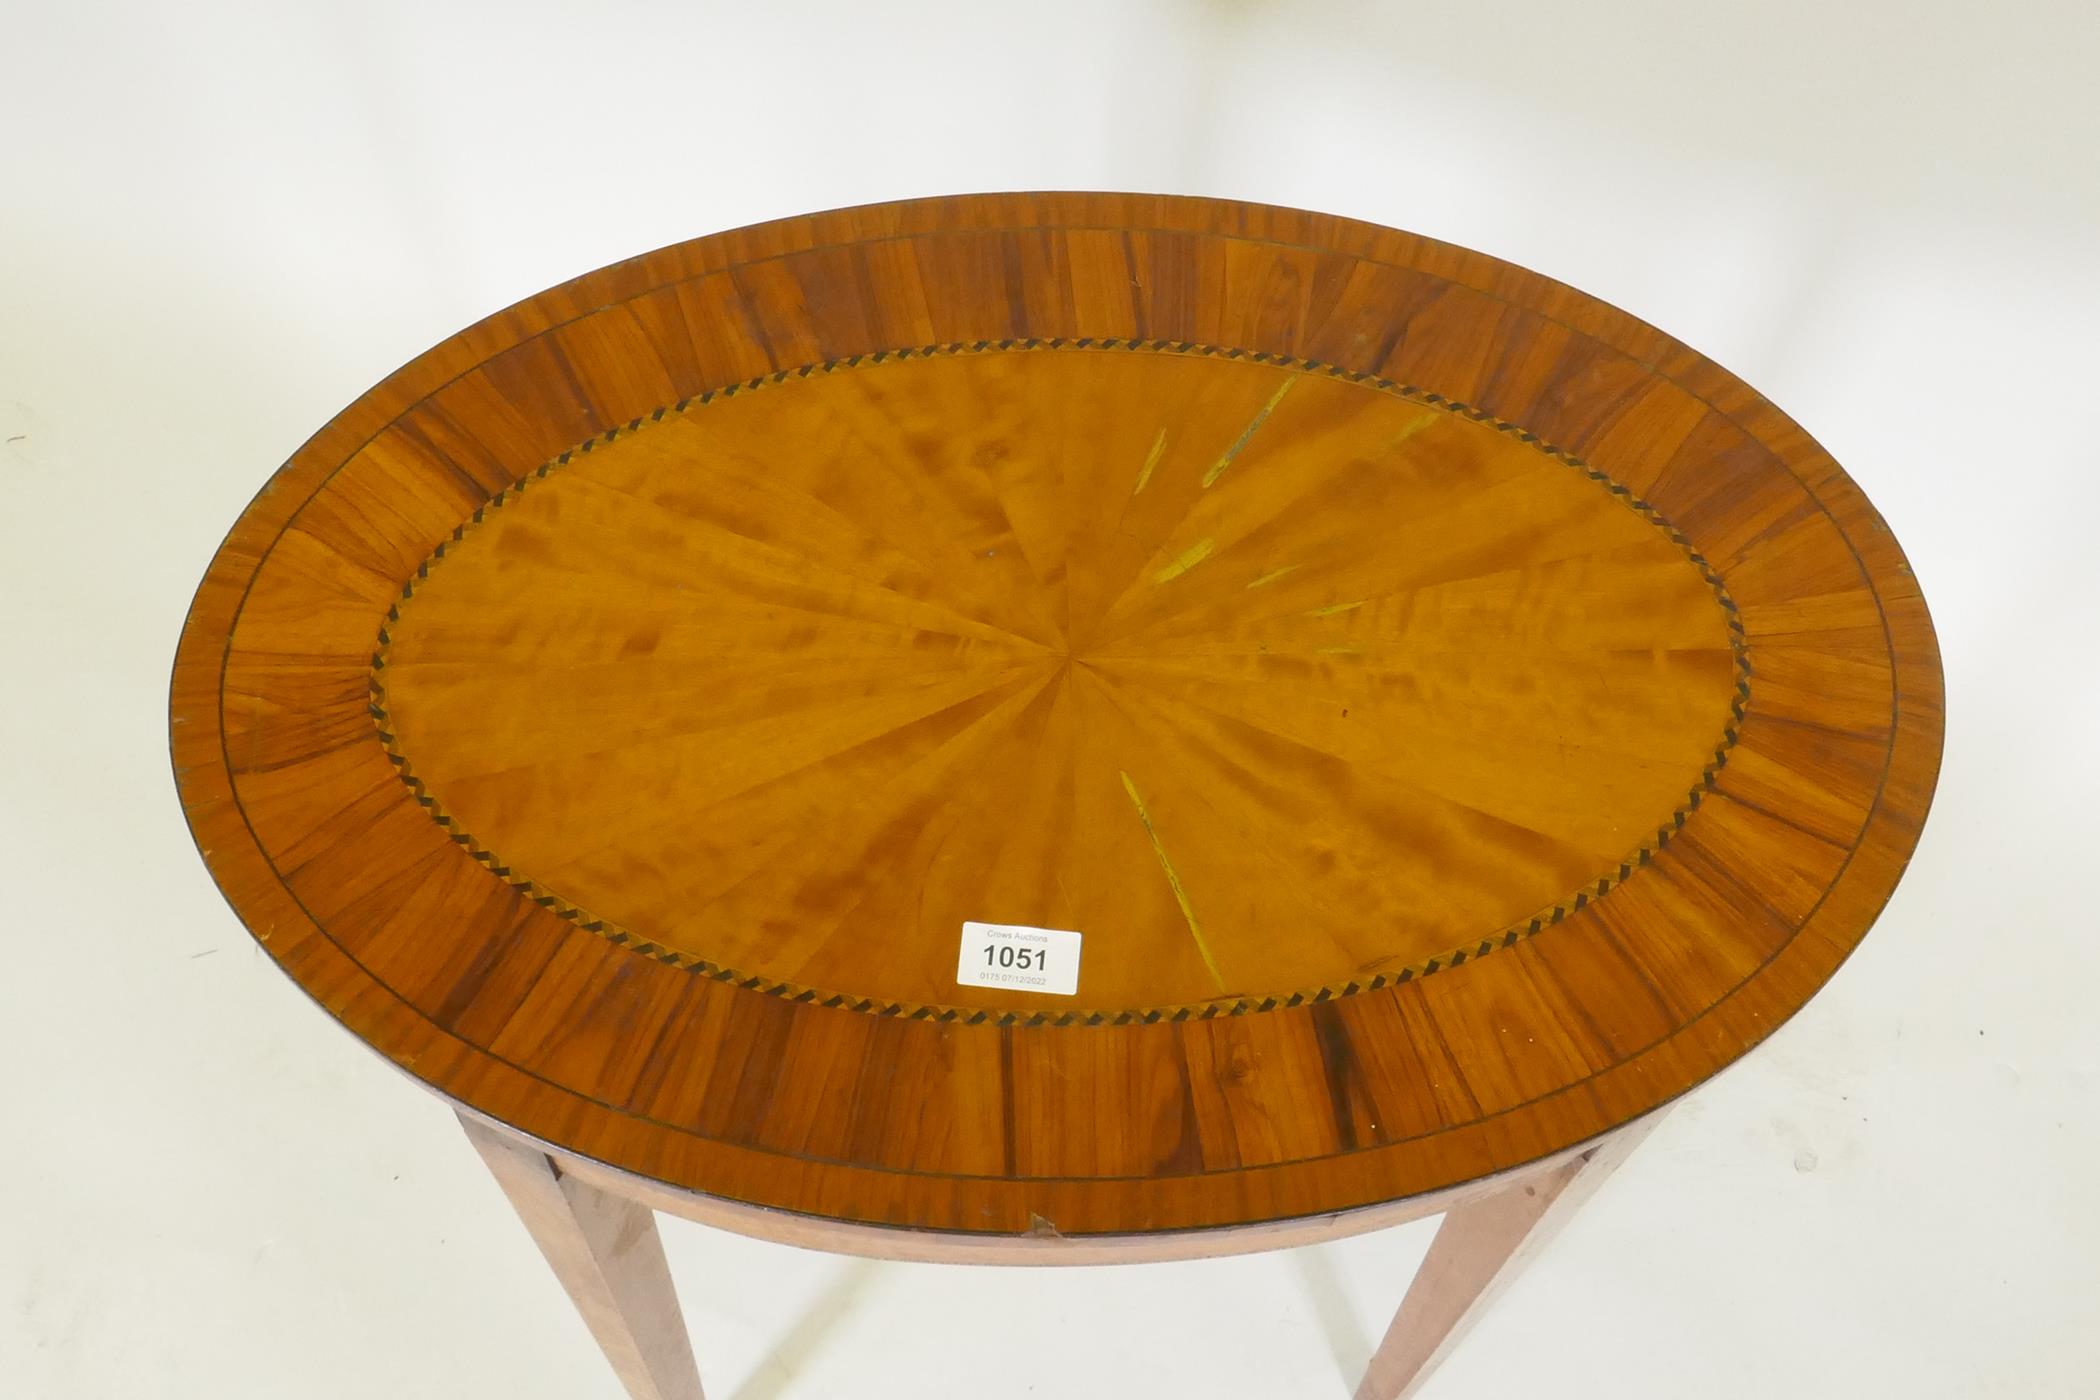 A C19th satinwood occasional table with segmented veneered oval top with laburnum crossbanding, 61 x - Image 2 of 6